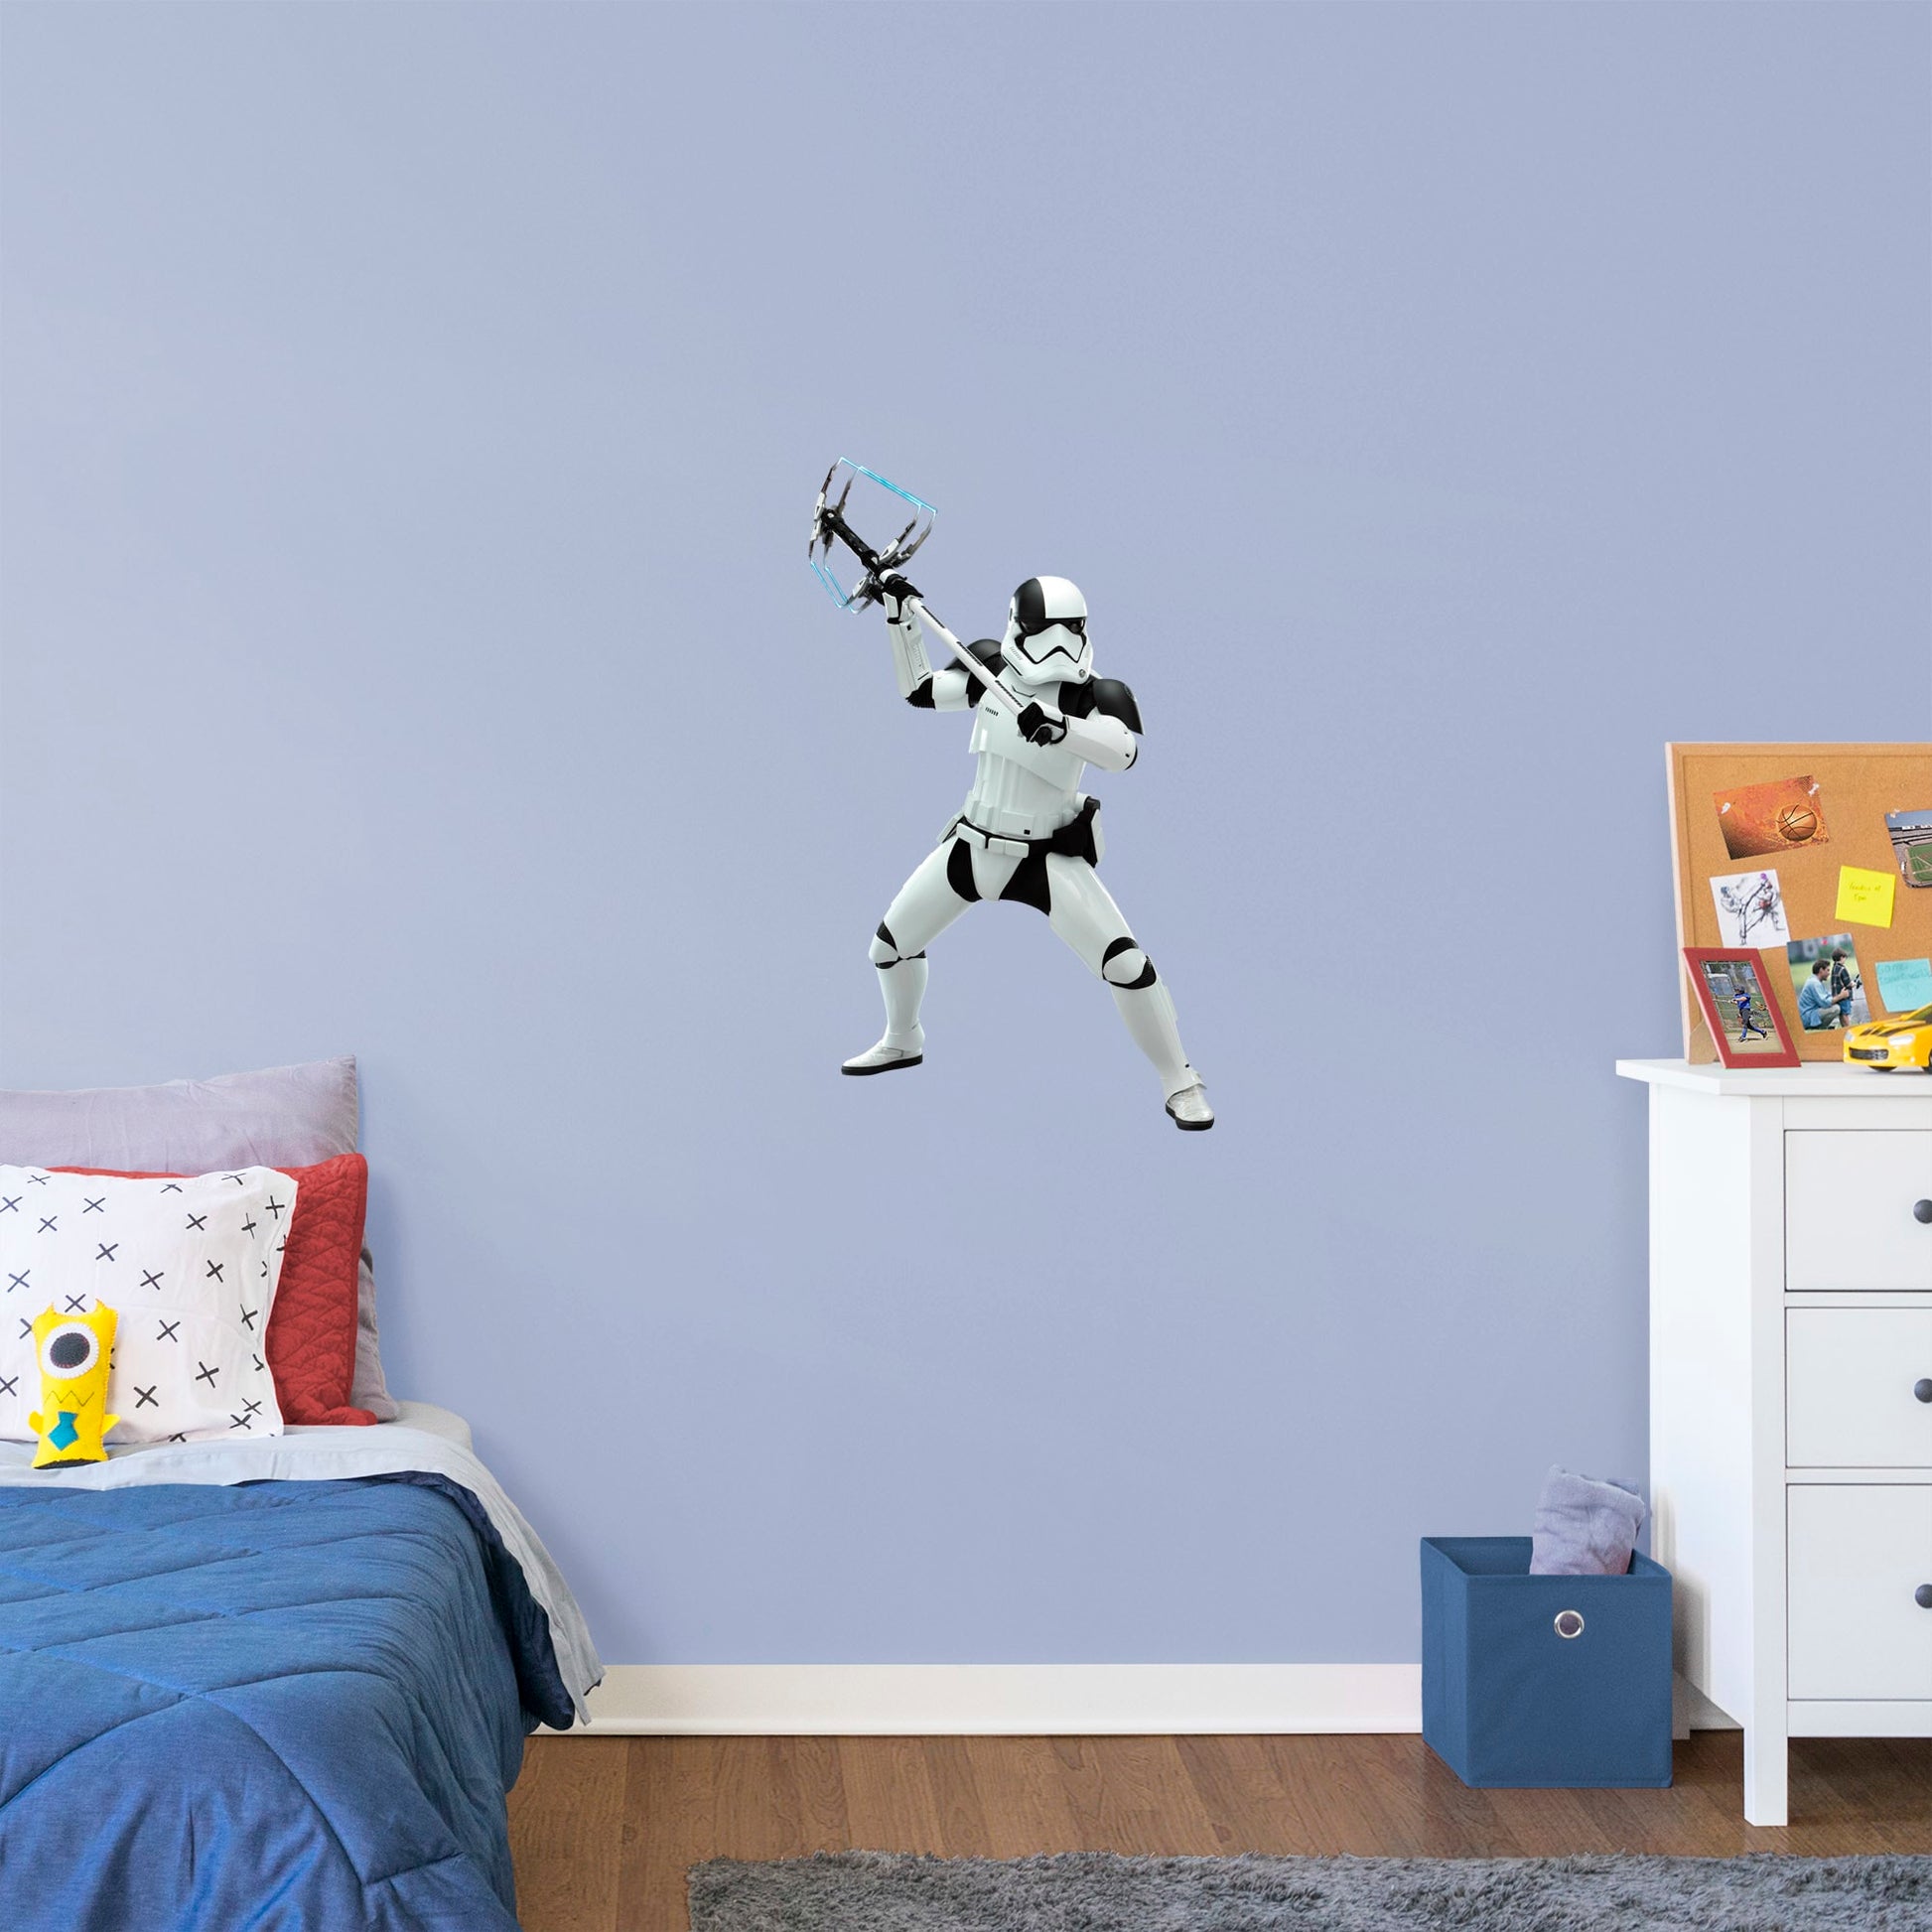 Life-Size Character + 2 Decals (55"W x 91"H)